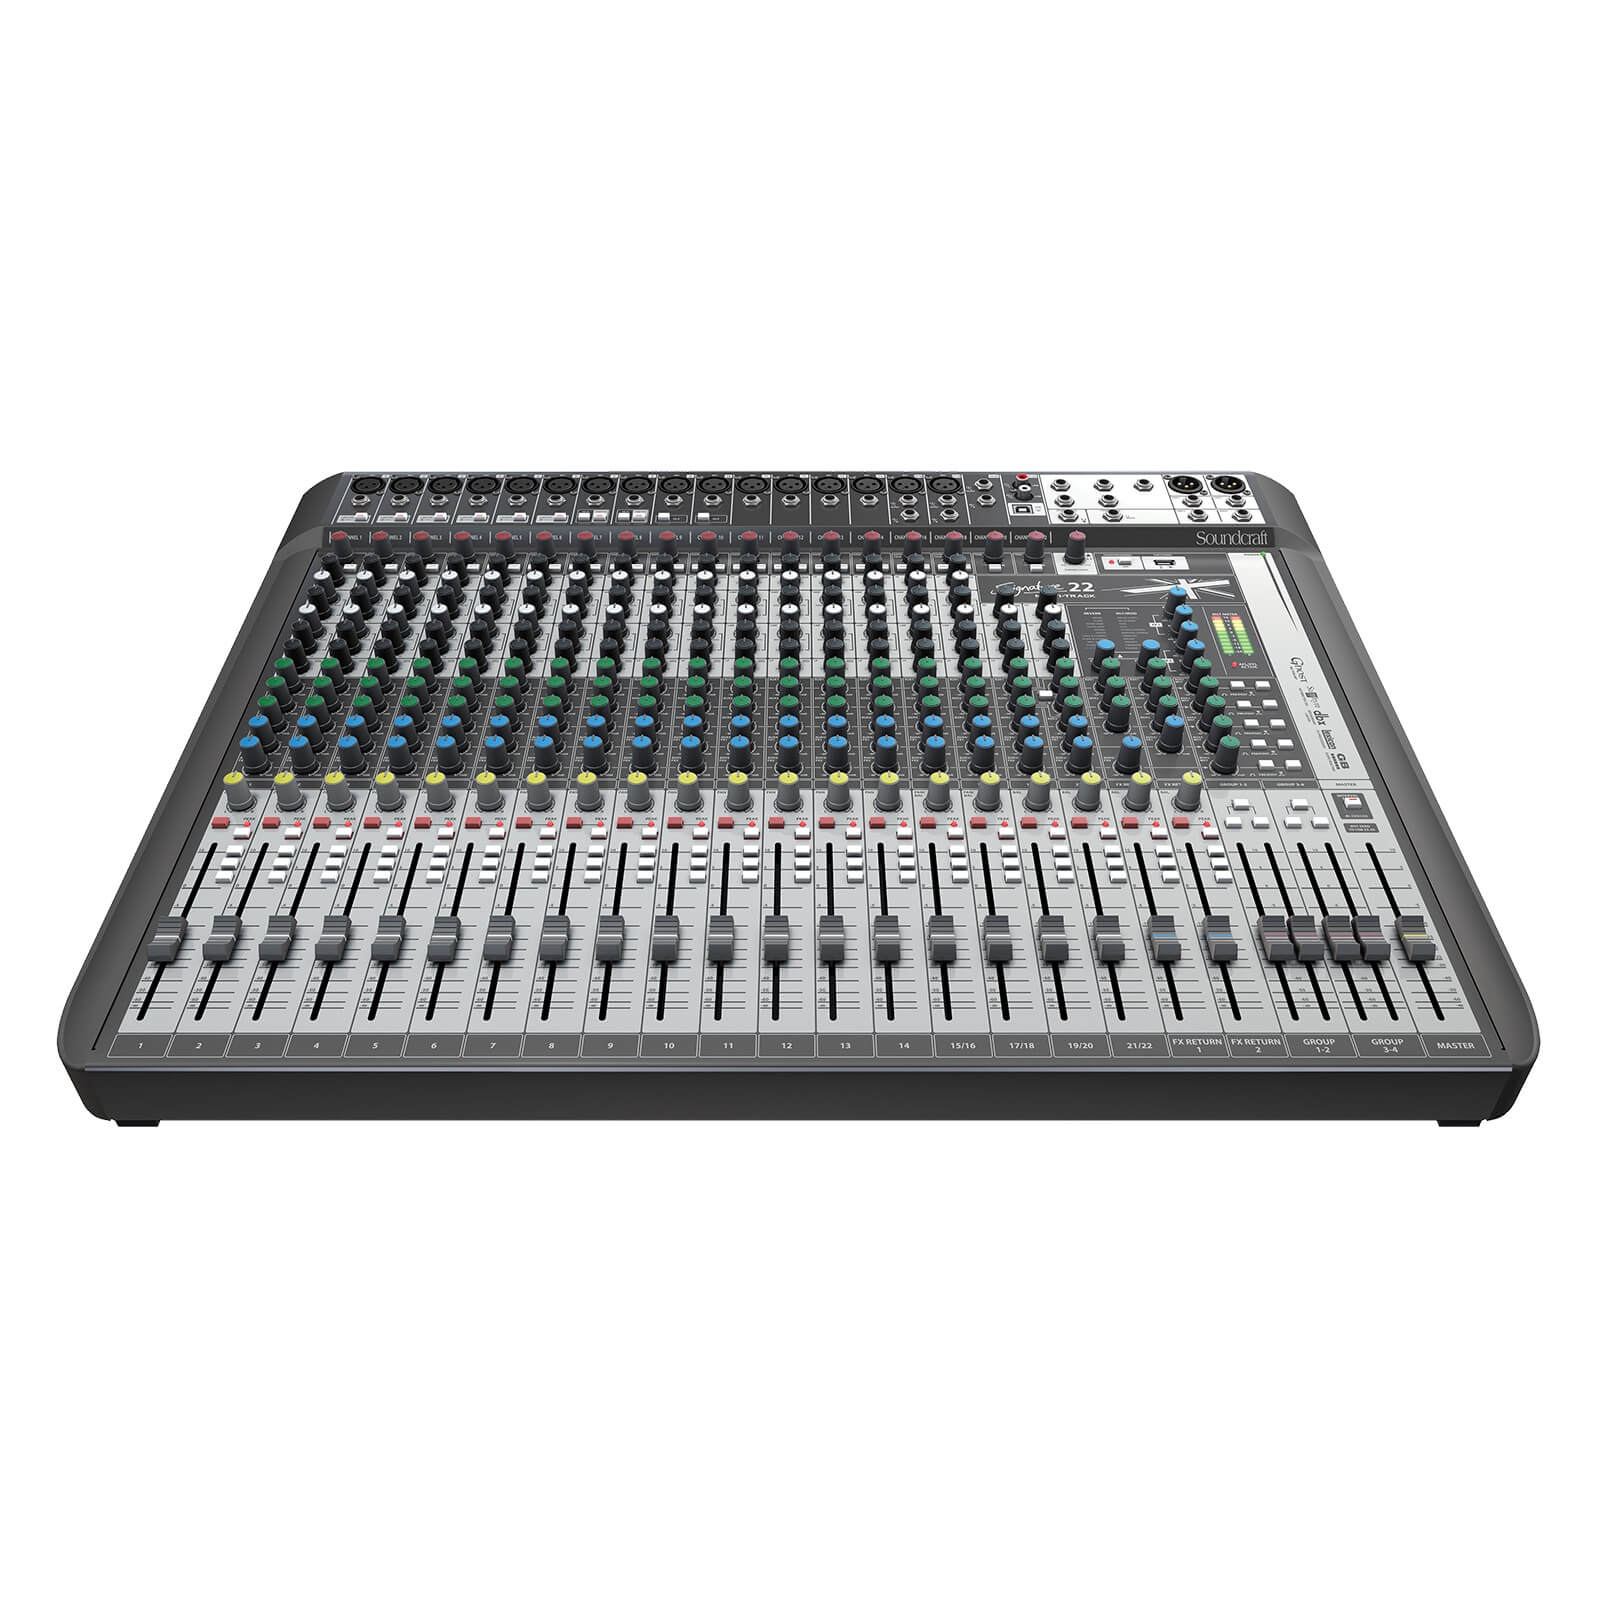 Soundcraft Signature 22MTK - 22-channel Analog Mixer with Lexicon Effects, front